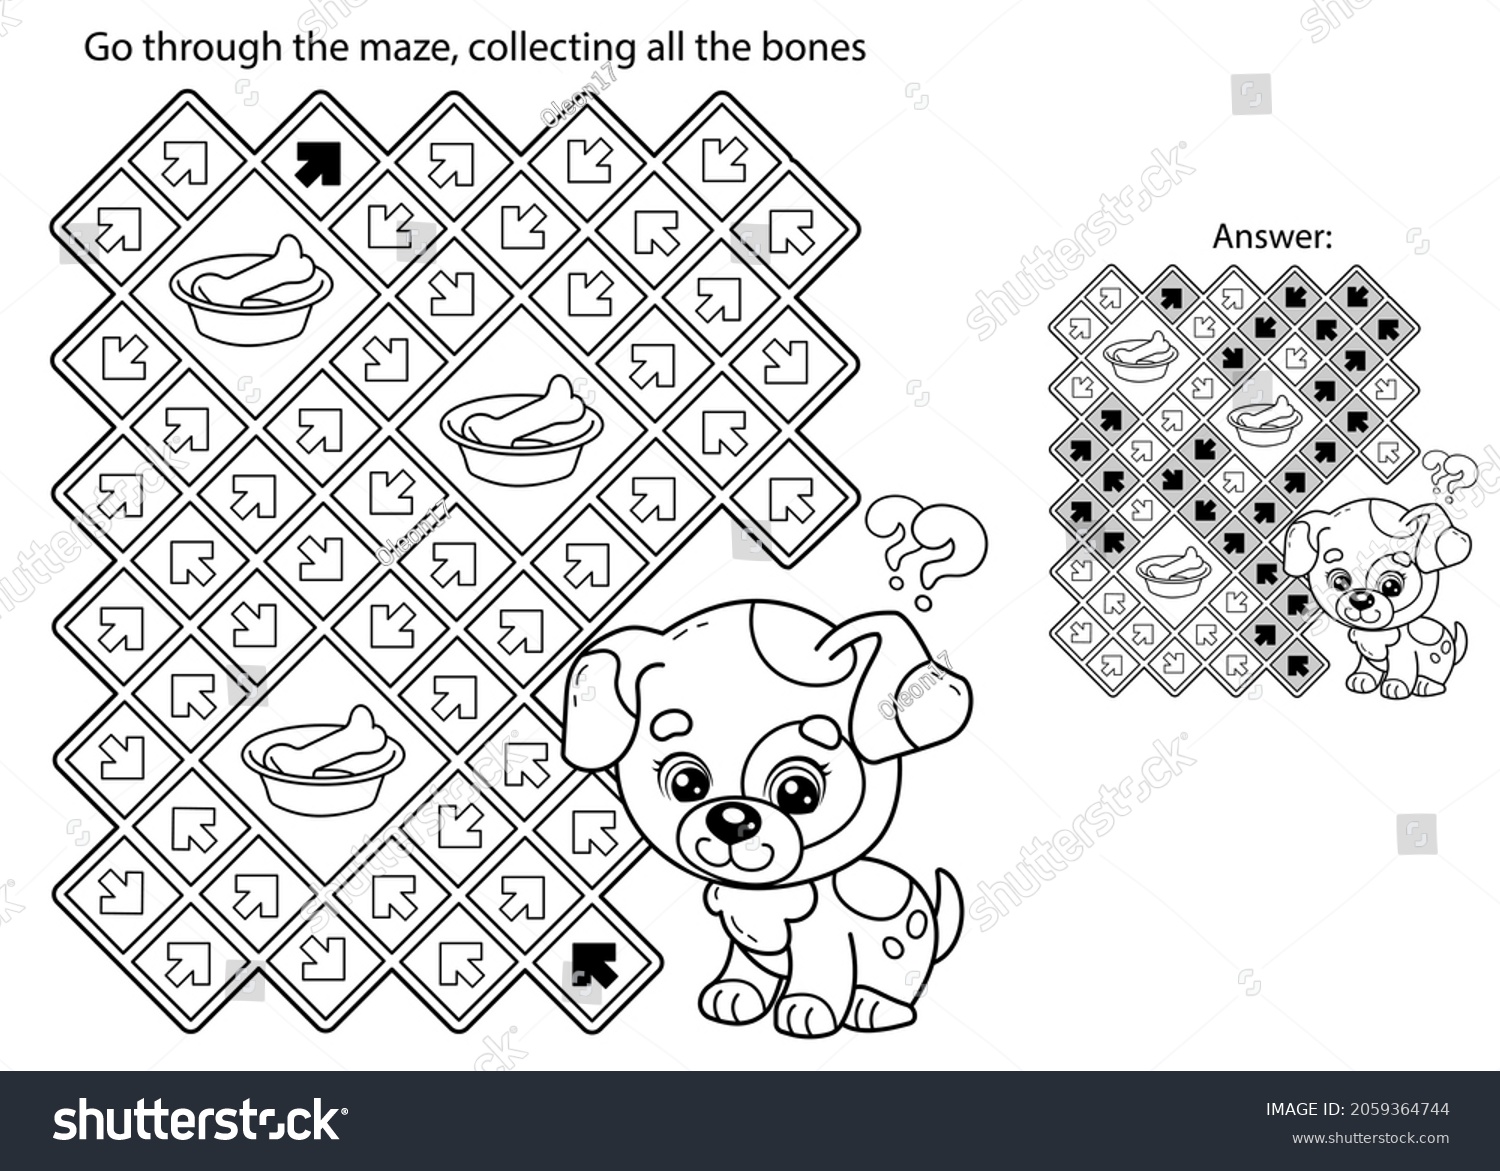 Dog colouring puzzle royalty